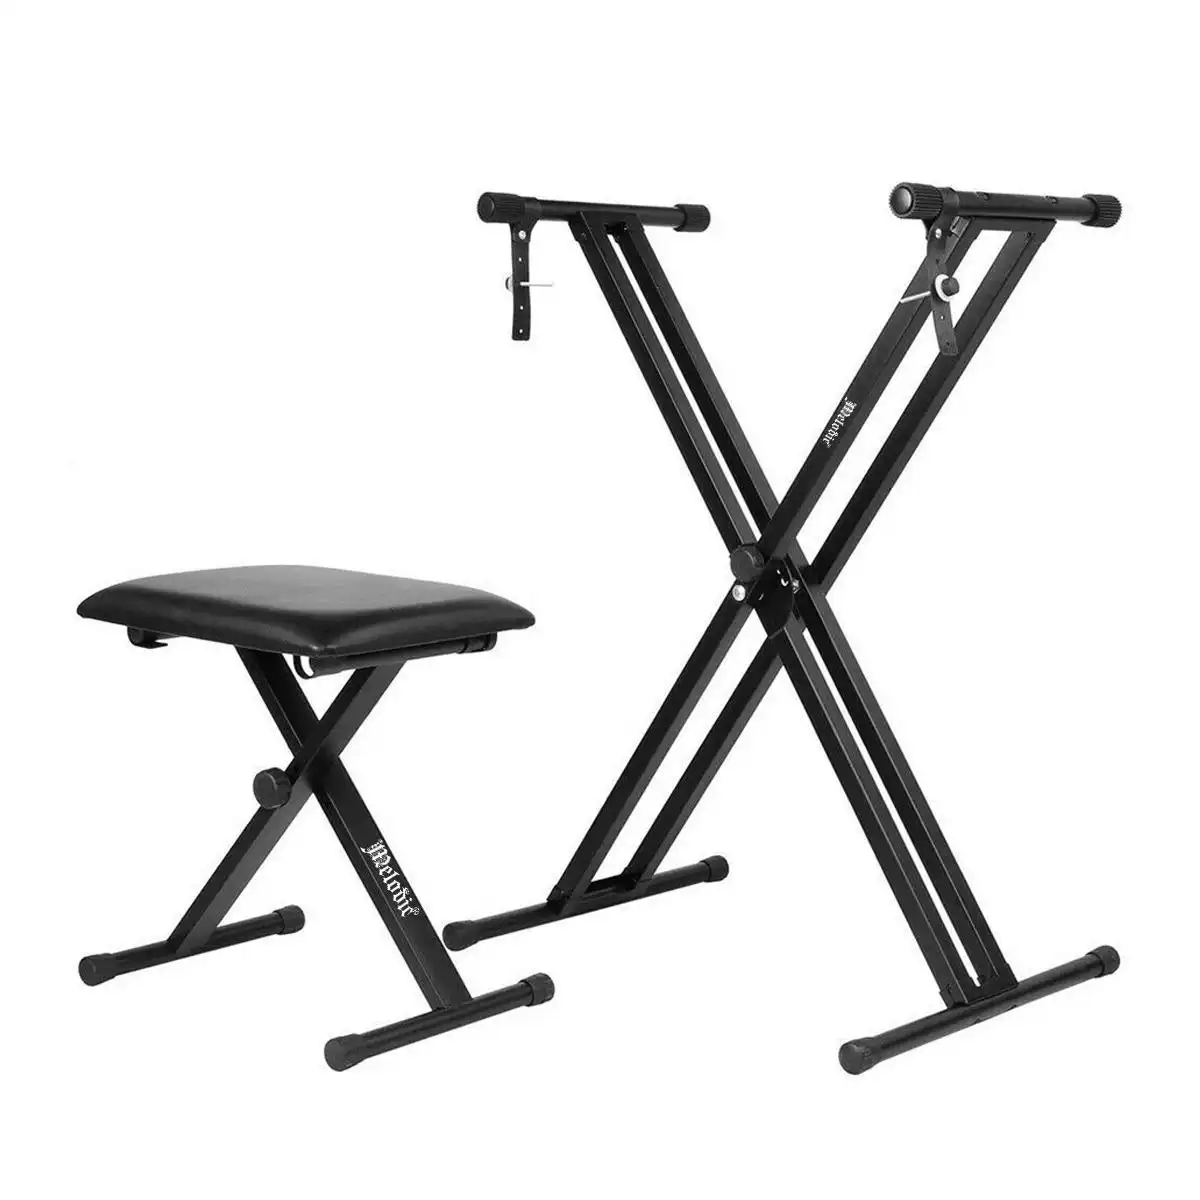 Melodic  Adjustable Keyboard Stand Portable Piano Stool X-Shaped Bench Seat Set